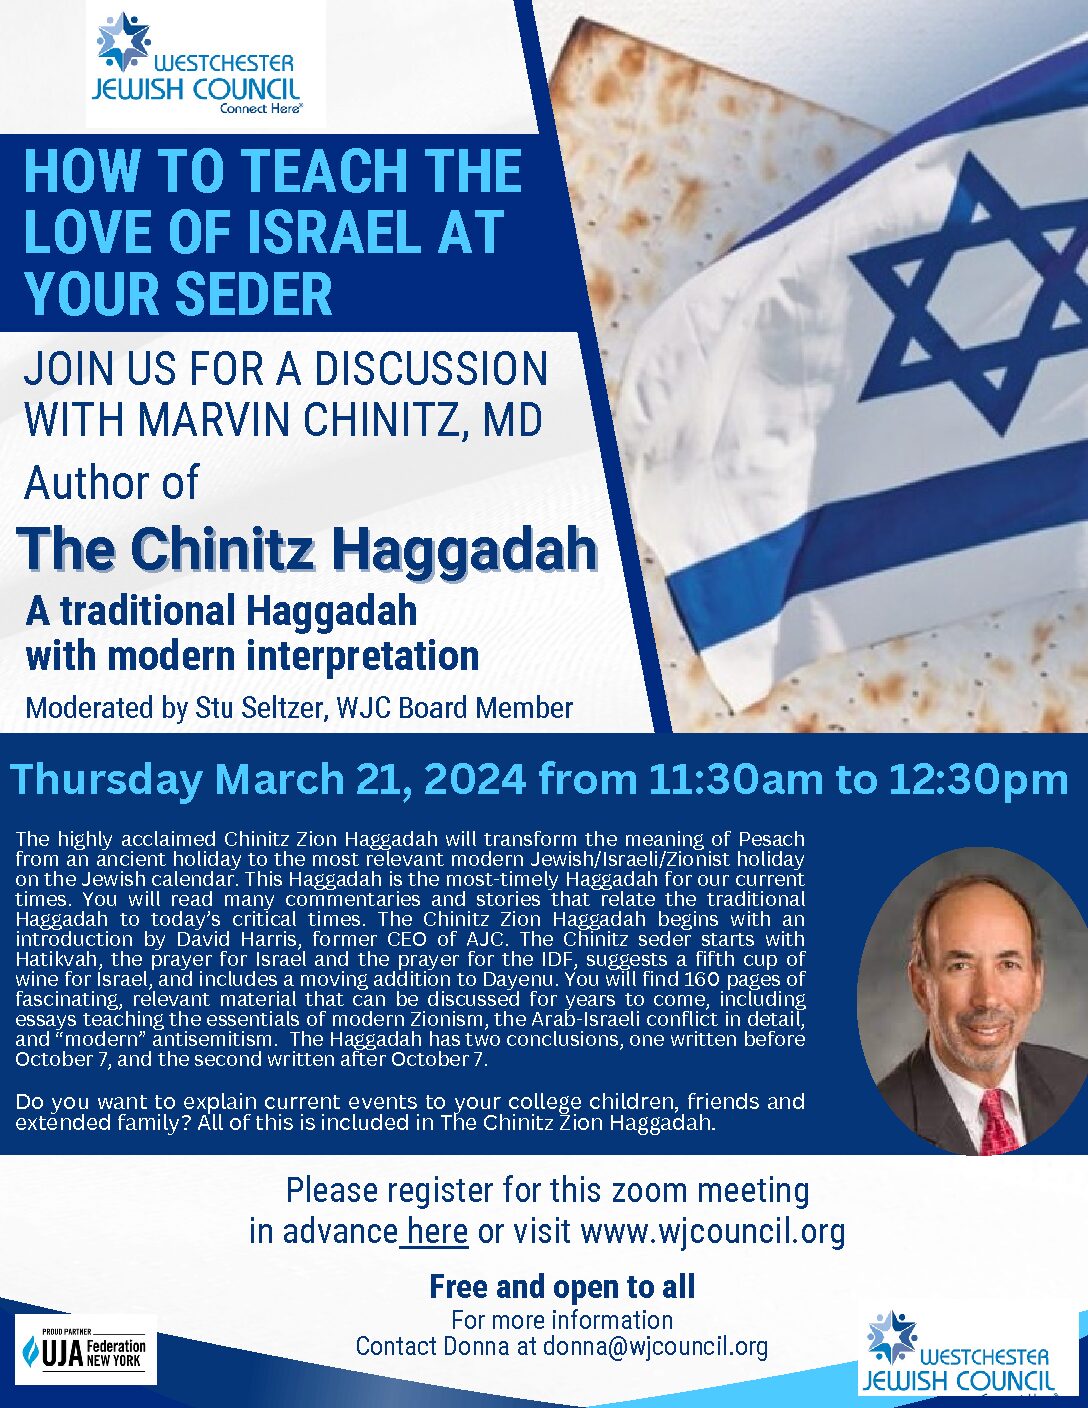 Westchester Jewish Council - Join Us For A Discussion with Marvin Chinitz, Author of the Chinitz Haggadah